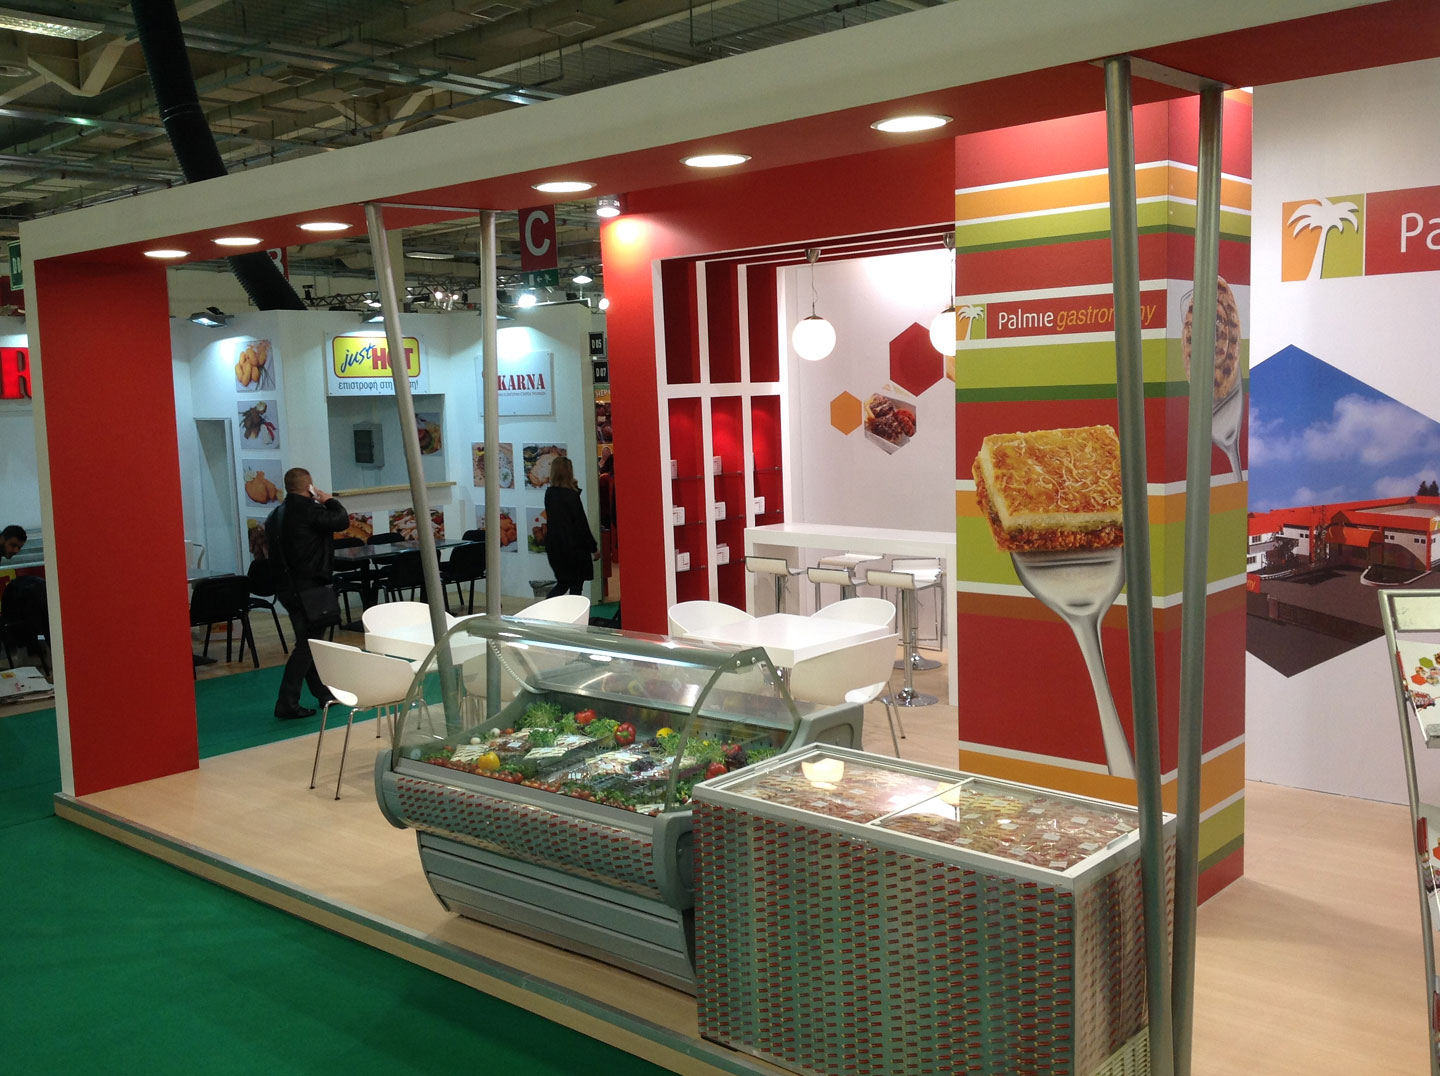 Palmie gastronomy took part in FOOD EXPO 2015